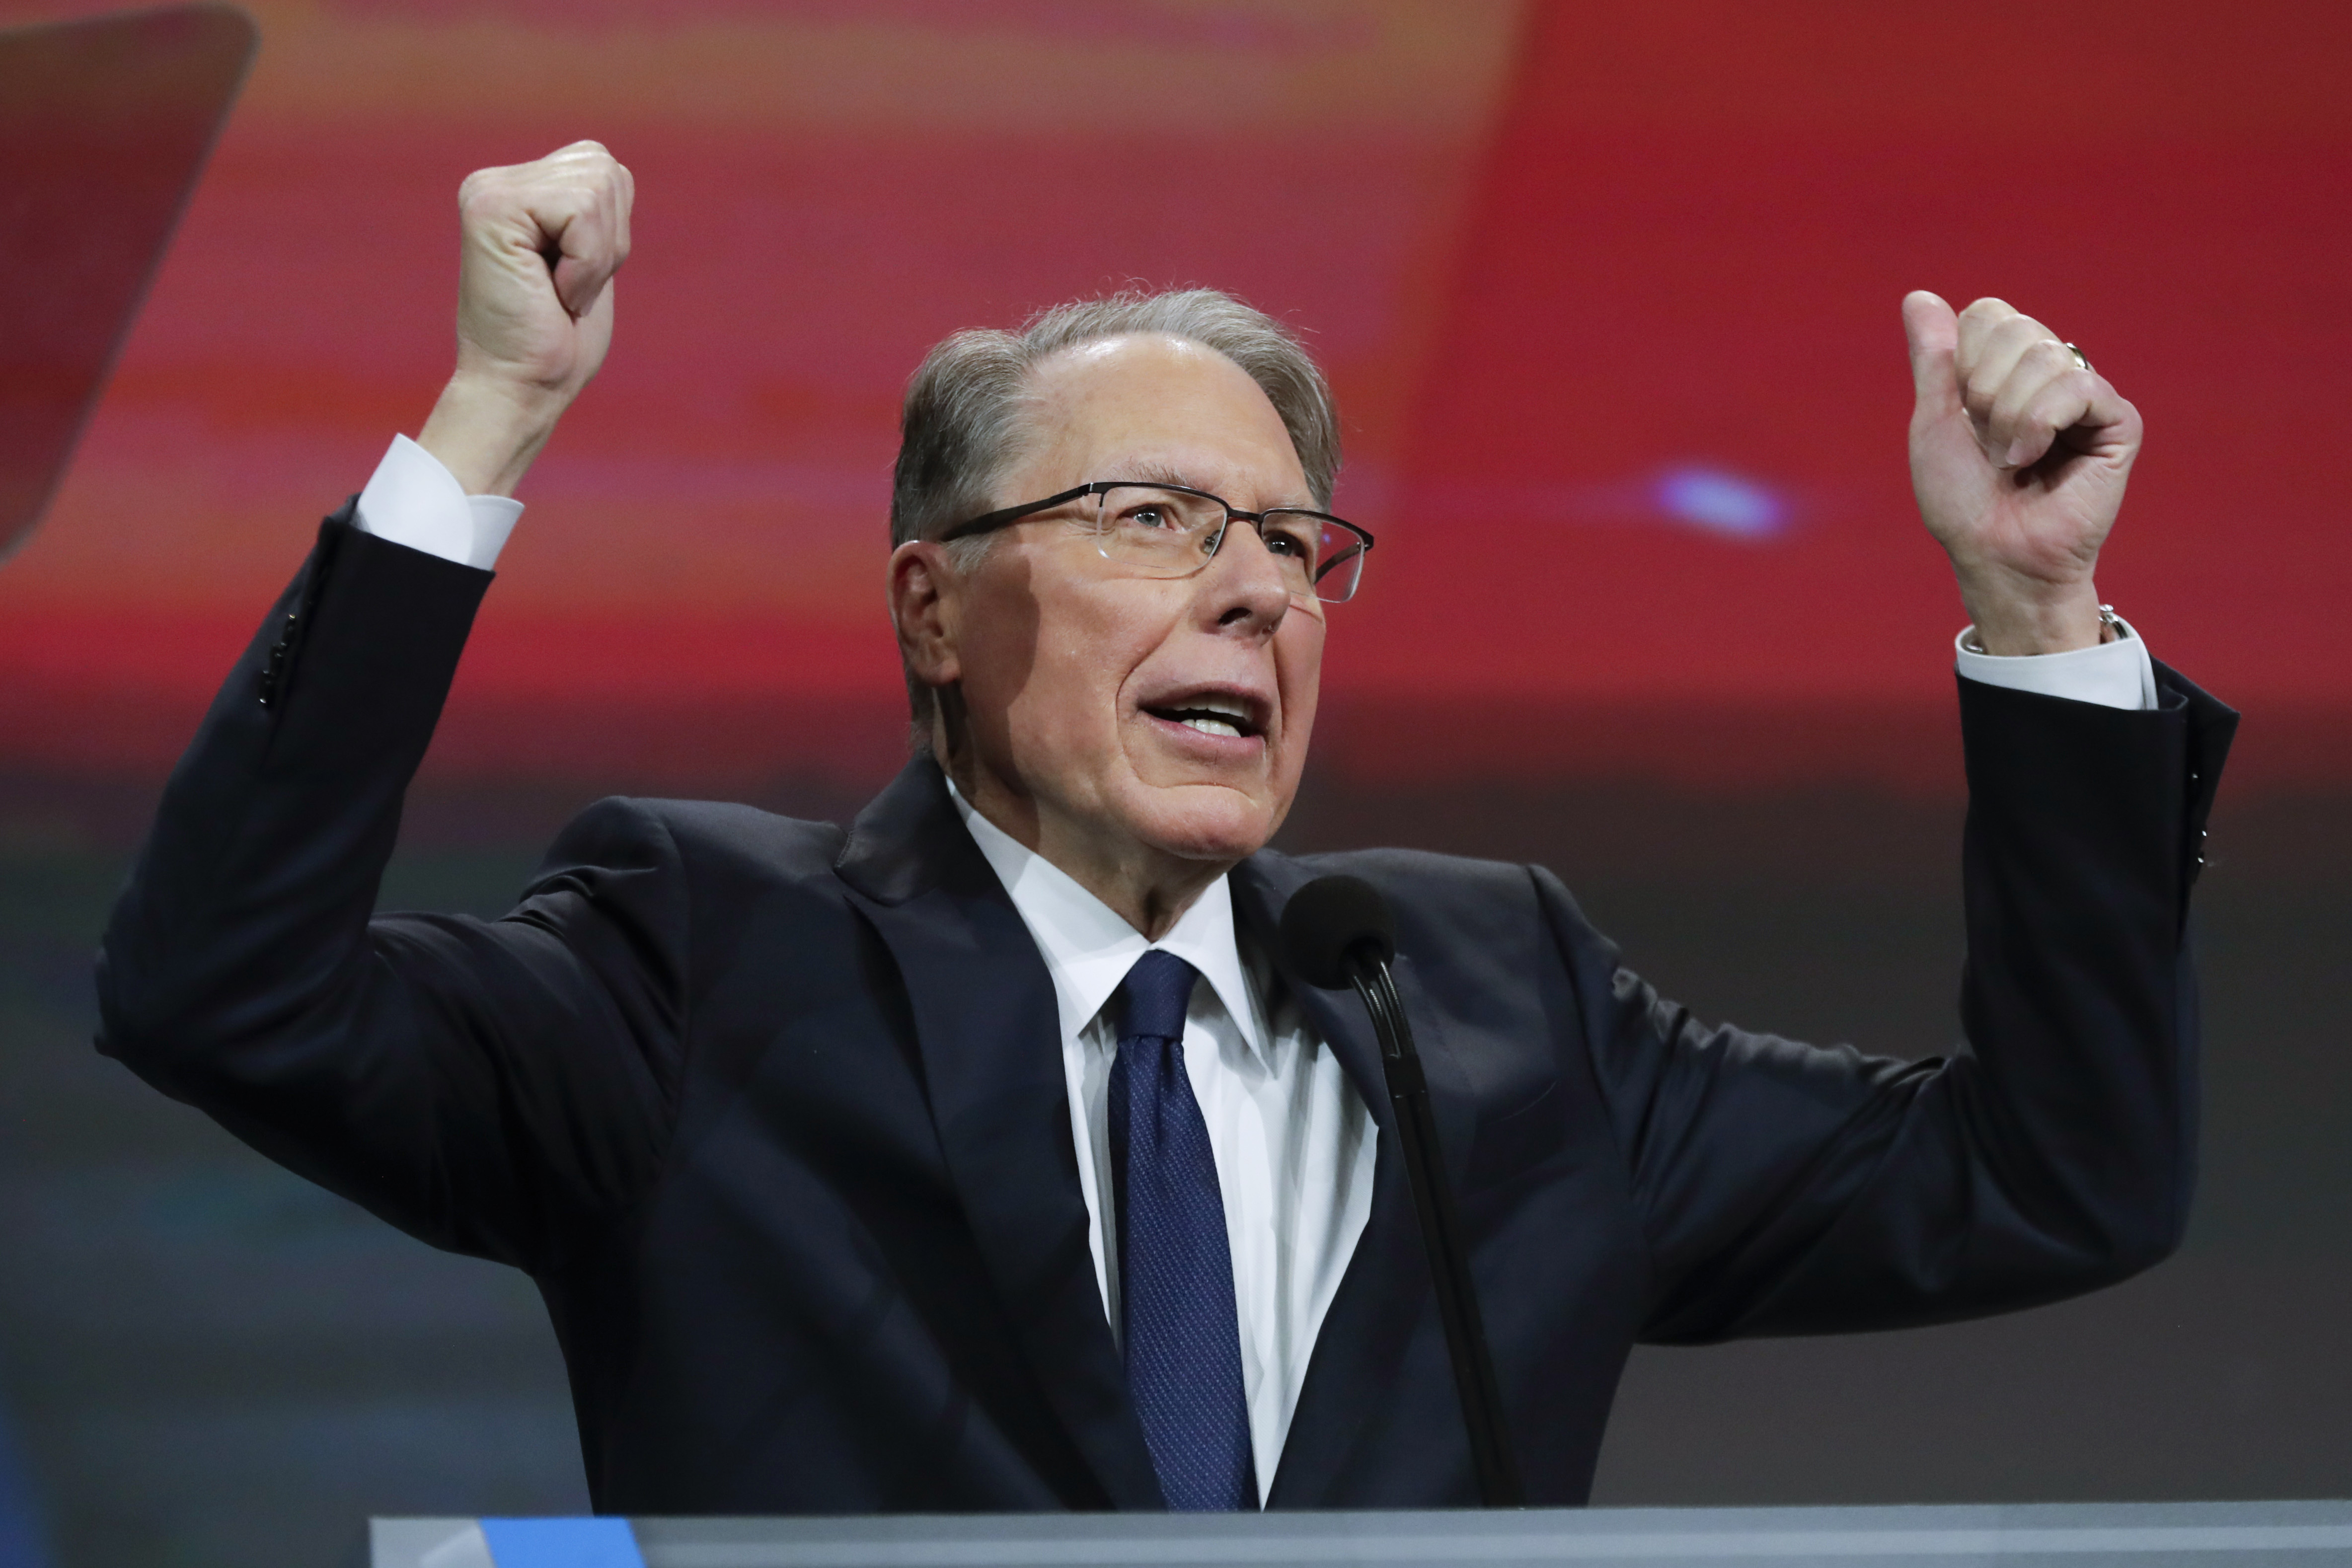 National Rifle Association Executive Vice President and CEO Wayne LaPierre speaks at the NRA Annual Meeting of Members in Indianapolis, Saturday, April 27, 2019.